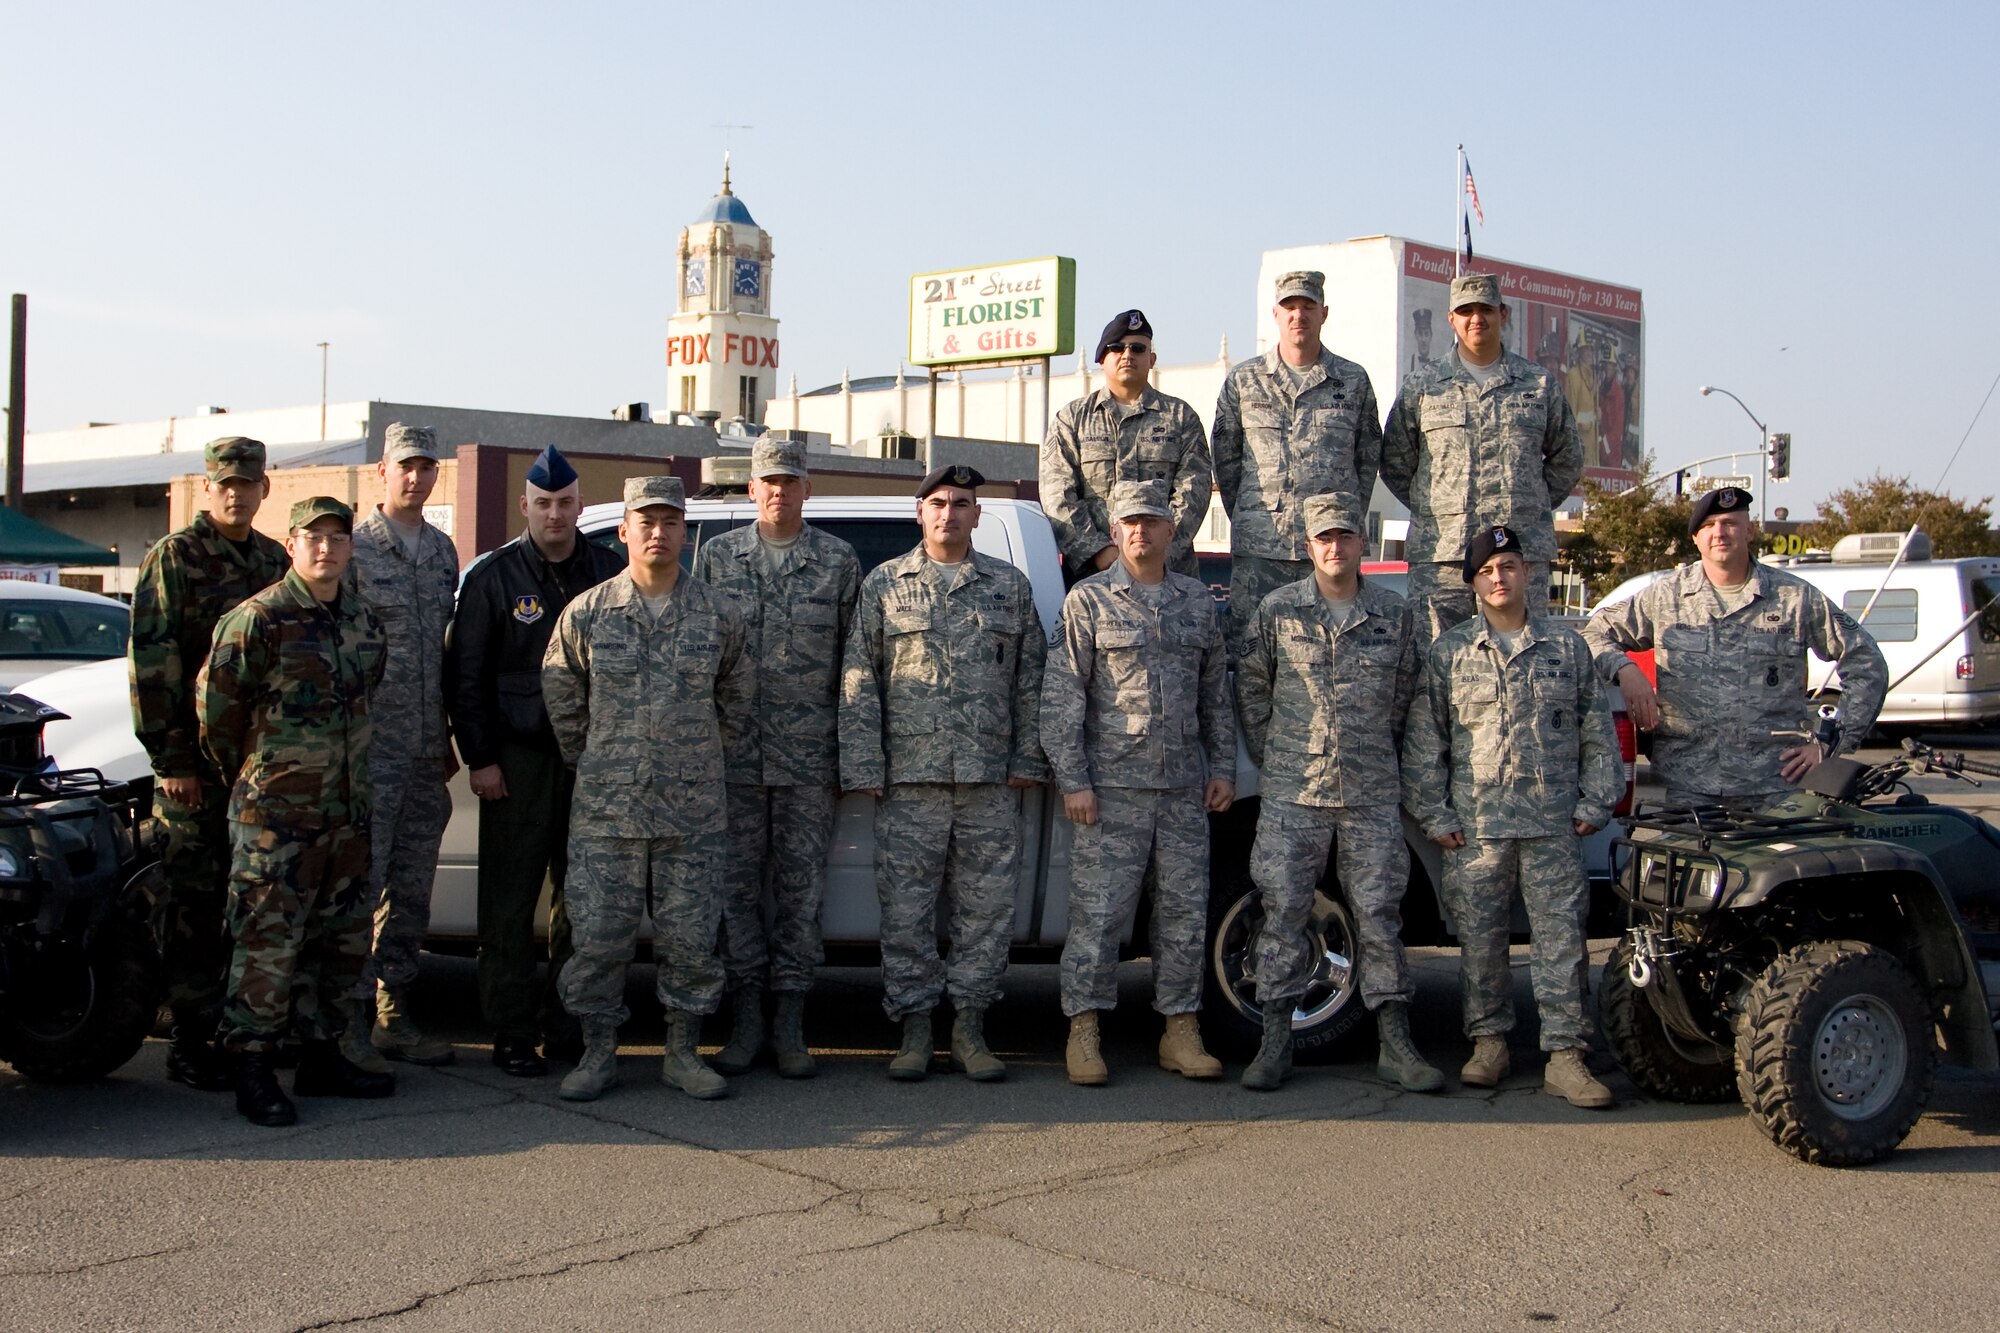 Airmen of the 95th Security Forces Squadron participated in the Veteran's Day parade in Bakersfield, Calif., Nov. 11. The Airmen and other Global War on Terrorism veterans were honored as the grand marshalls of the Bakersfield Veterans Day parade. (Photo by Myrna Mace)